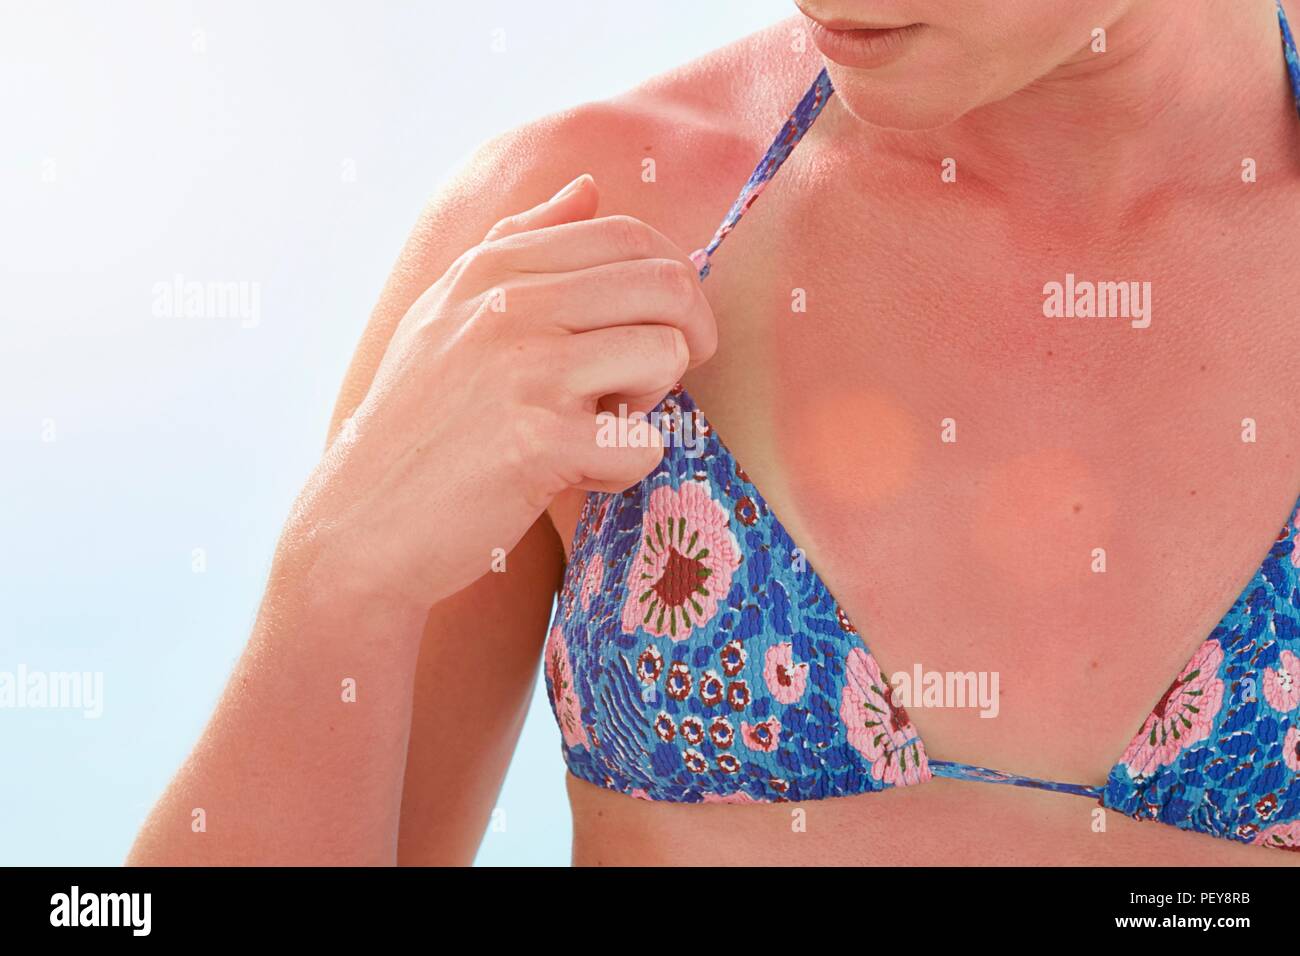 Woman with sunburnt chest. Stock Photo